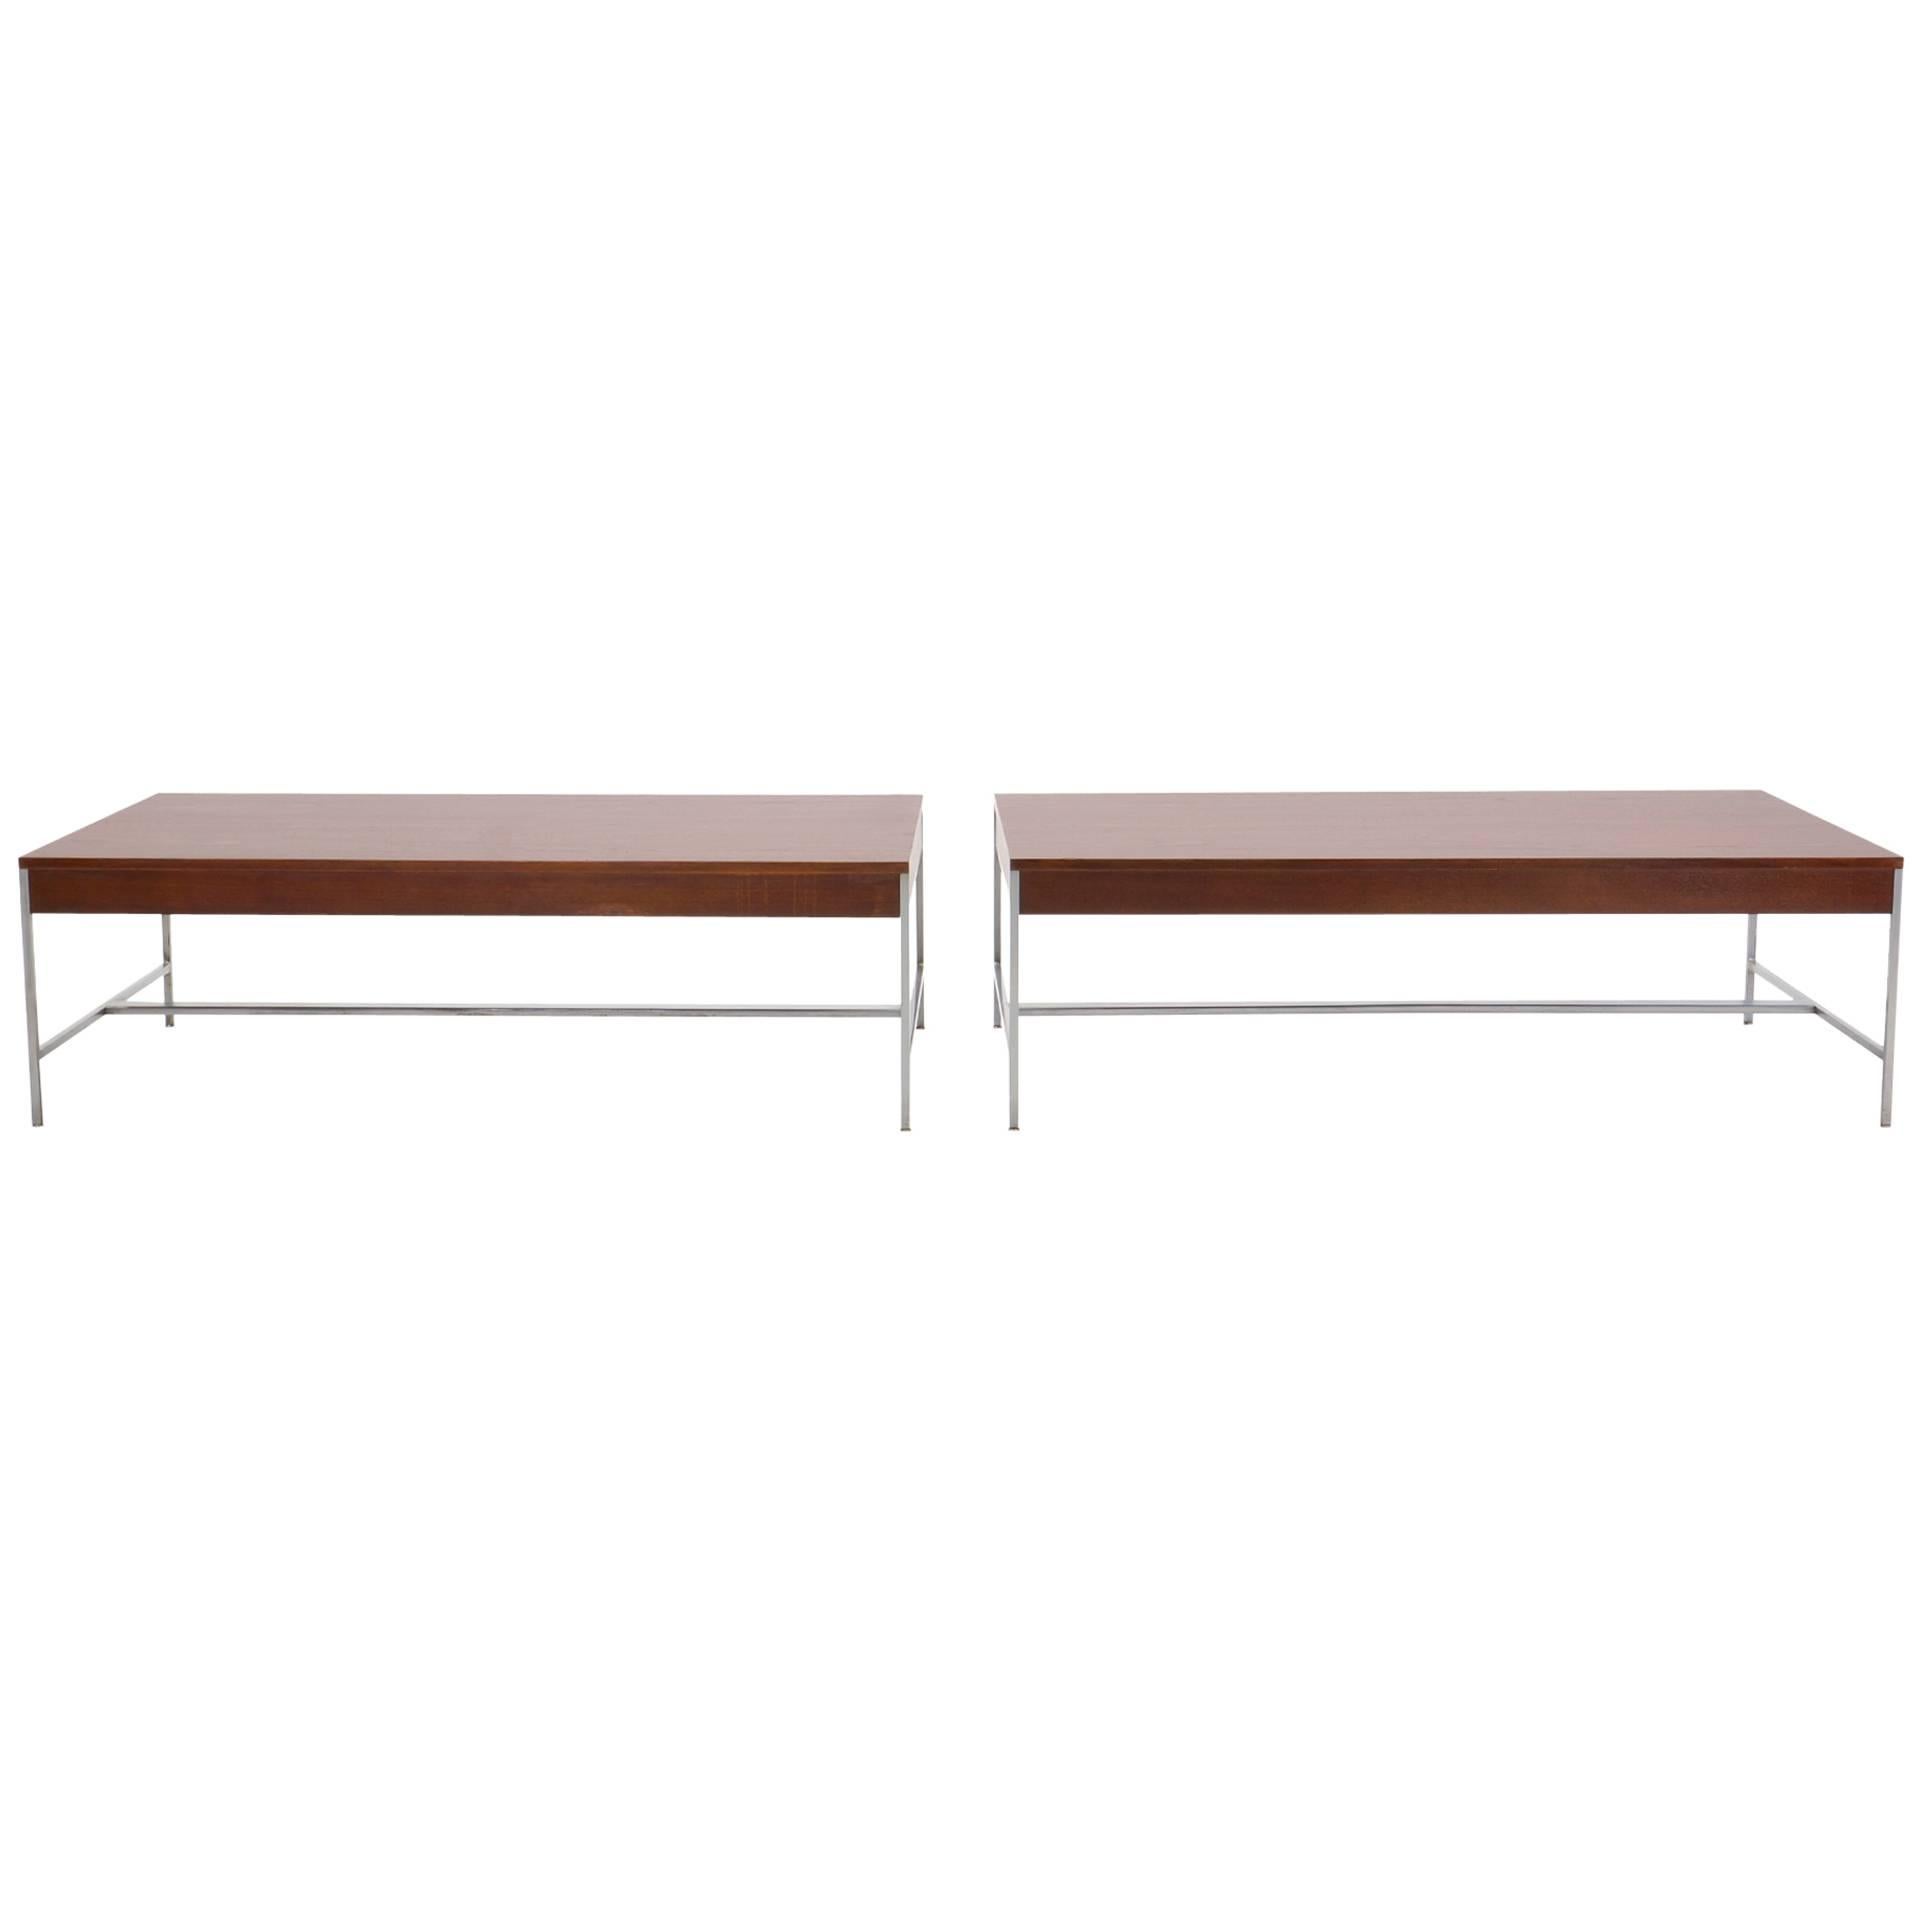 Matched Pair of George Nelson Coffee Tables